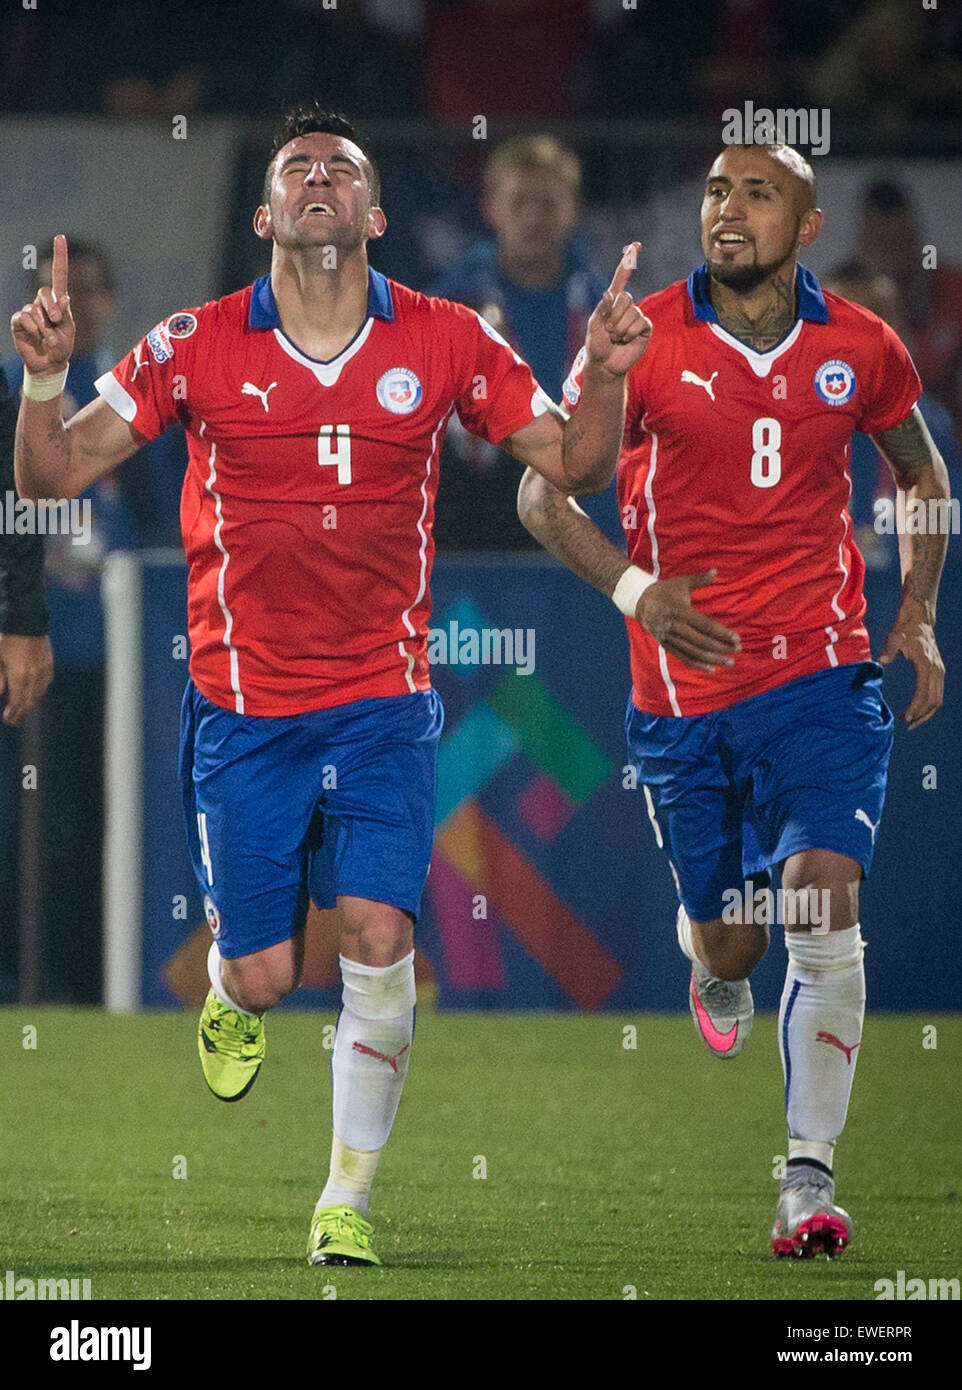 Santiago, Chile. 24th June, 2015. Mauricio Isla (L) of Chile celebrates after scoring during their quarterfinal against Uruguay at 2015 Copa America in Santiago, Chile, on June 24, 2015. Chile won 1-0. Credit:  Pedro Mera/Xinhua/Alamy Live News Stock Photo